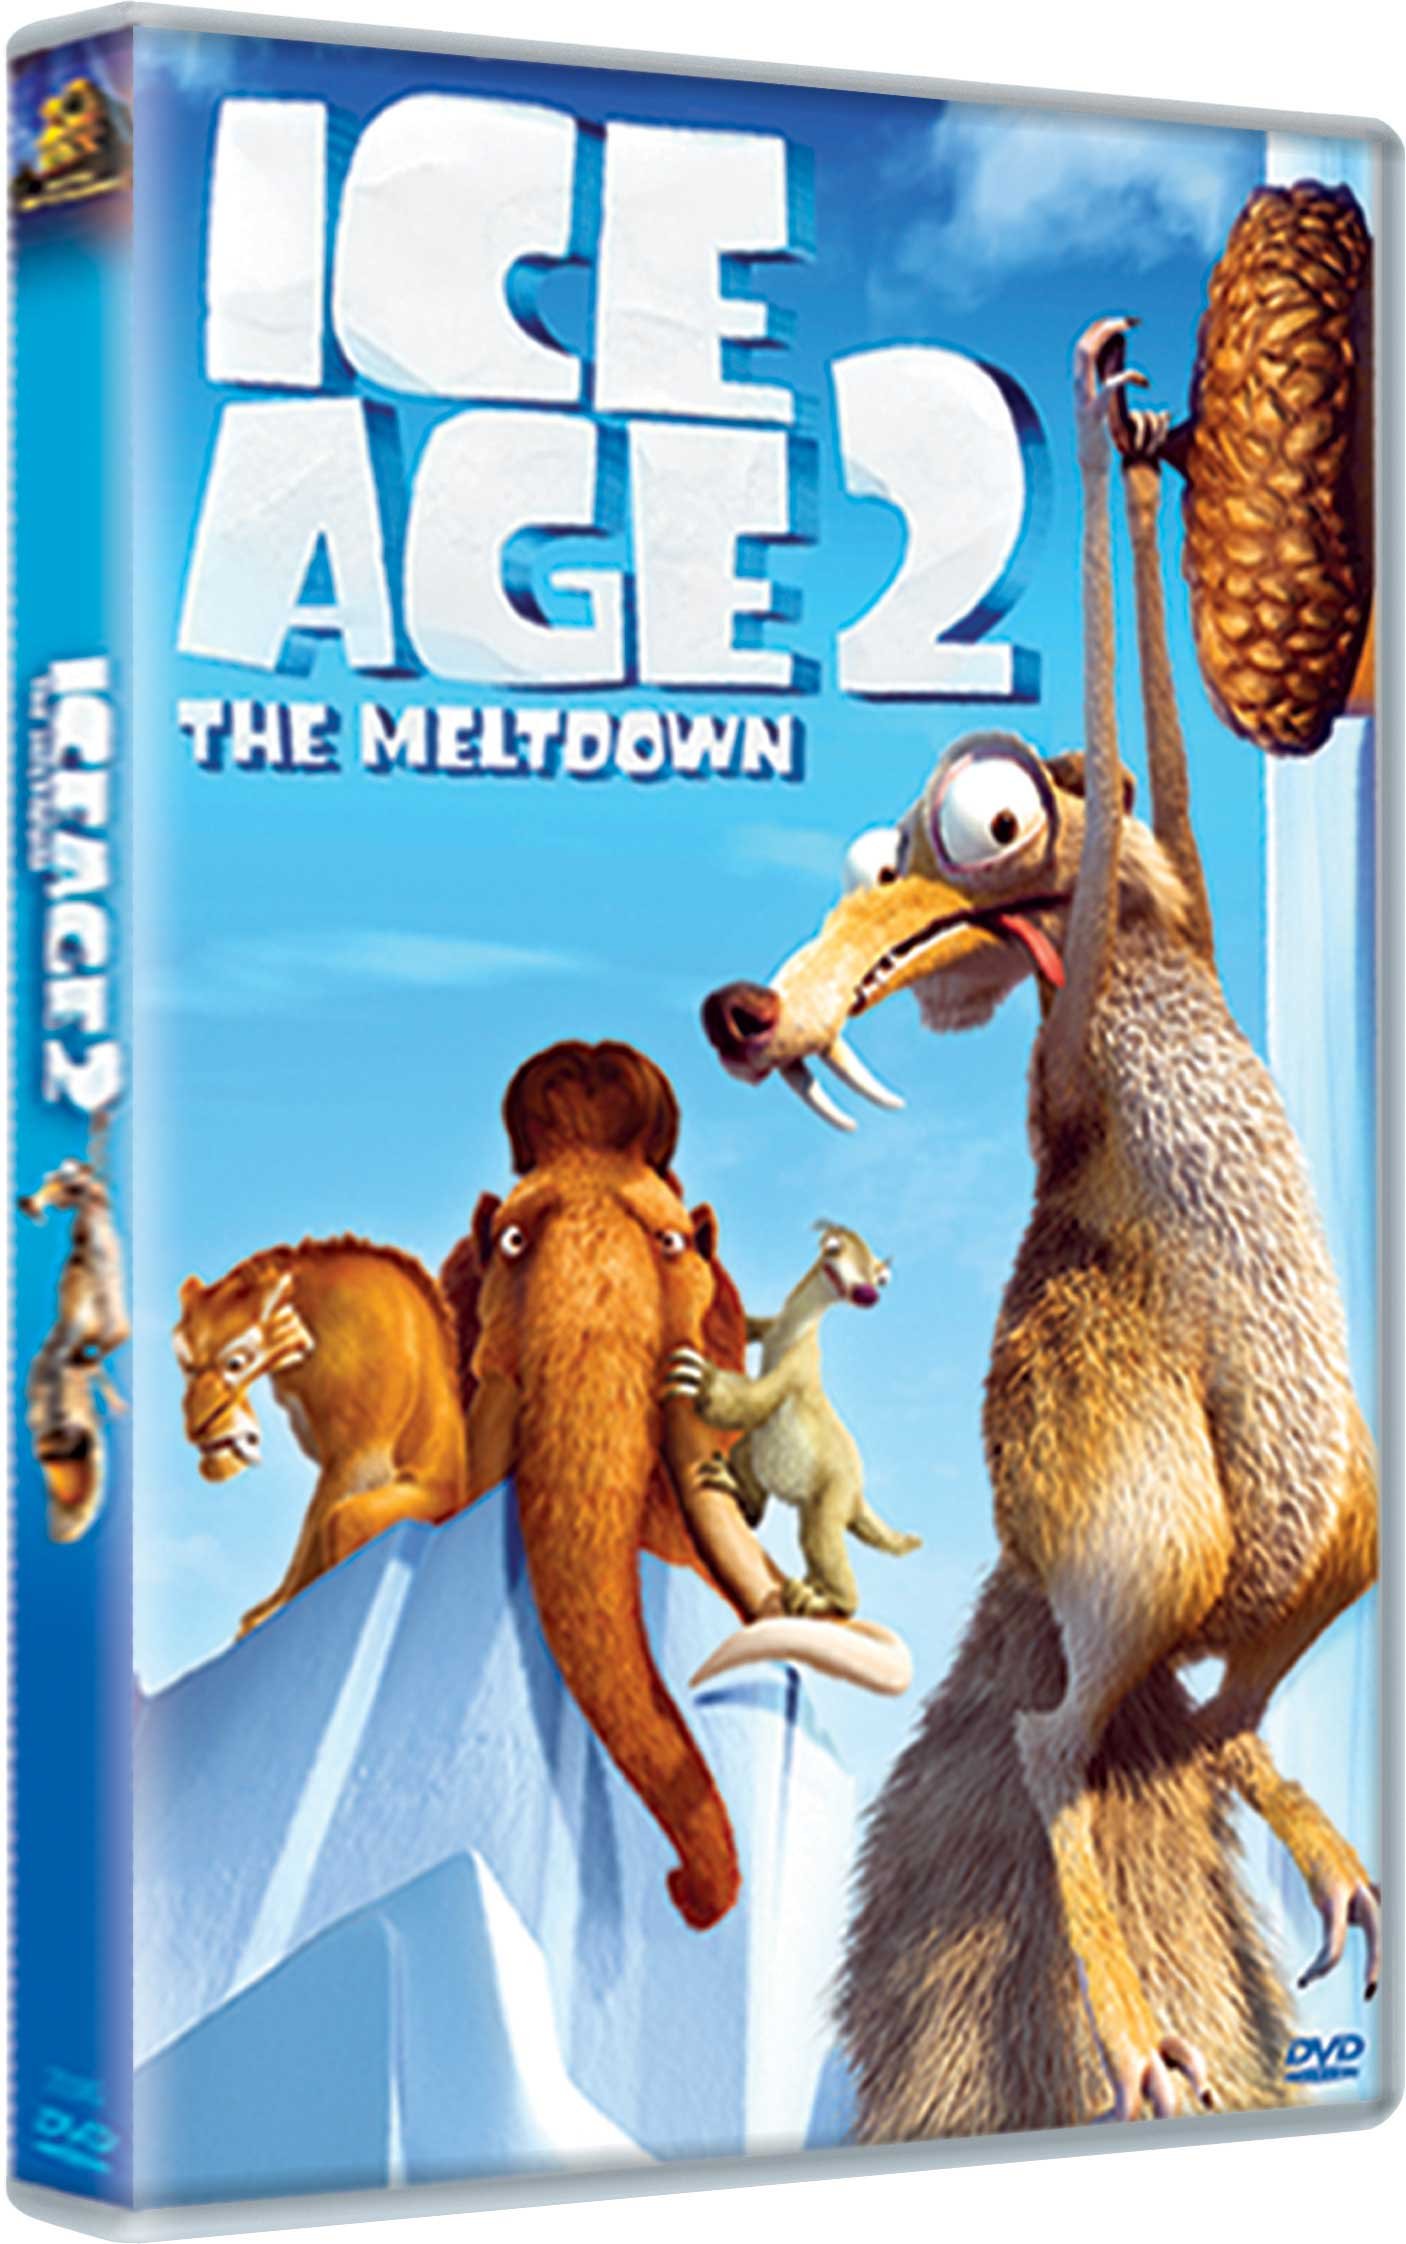 ice-age-2-the-meltdown-movie-purchase-or-watch-online